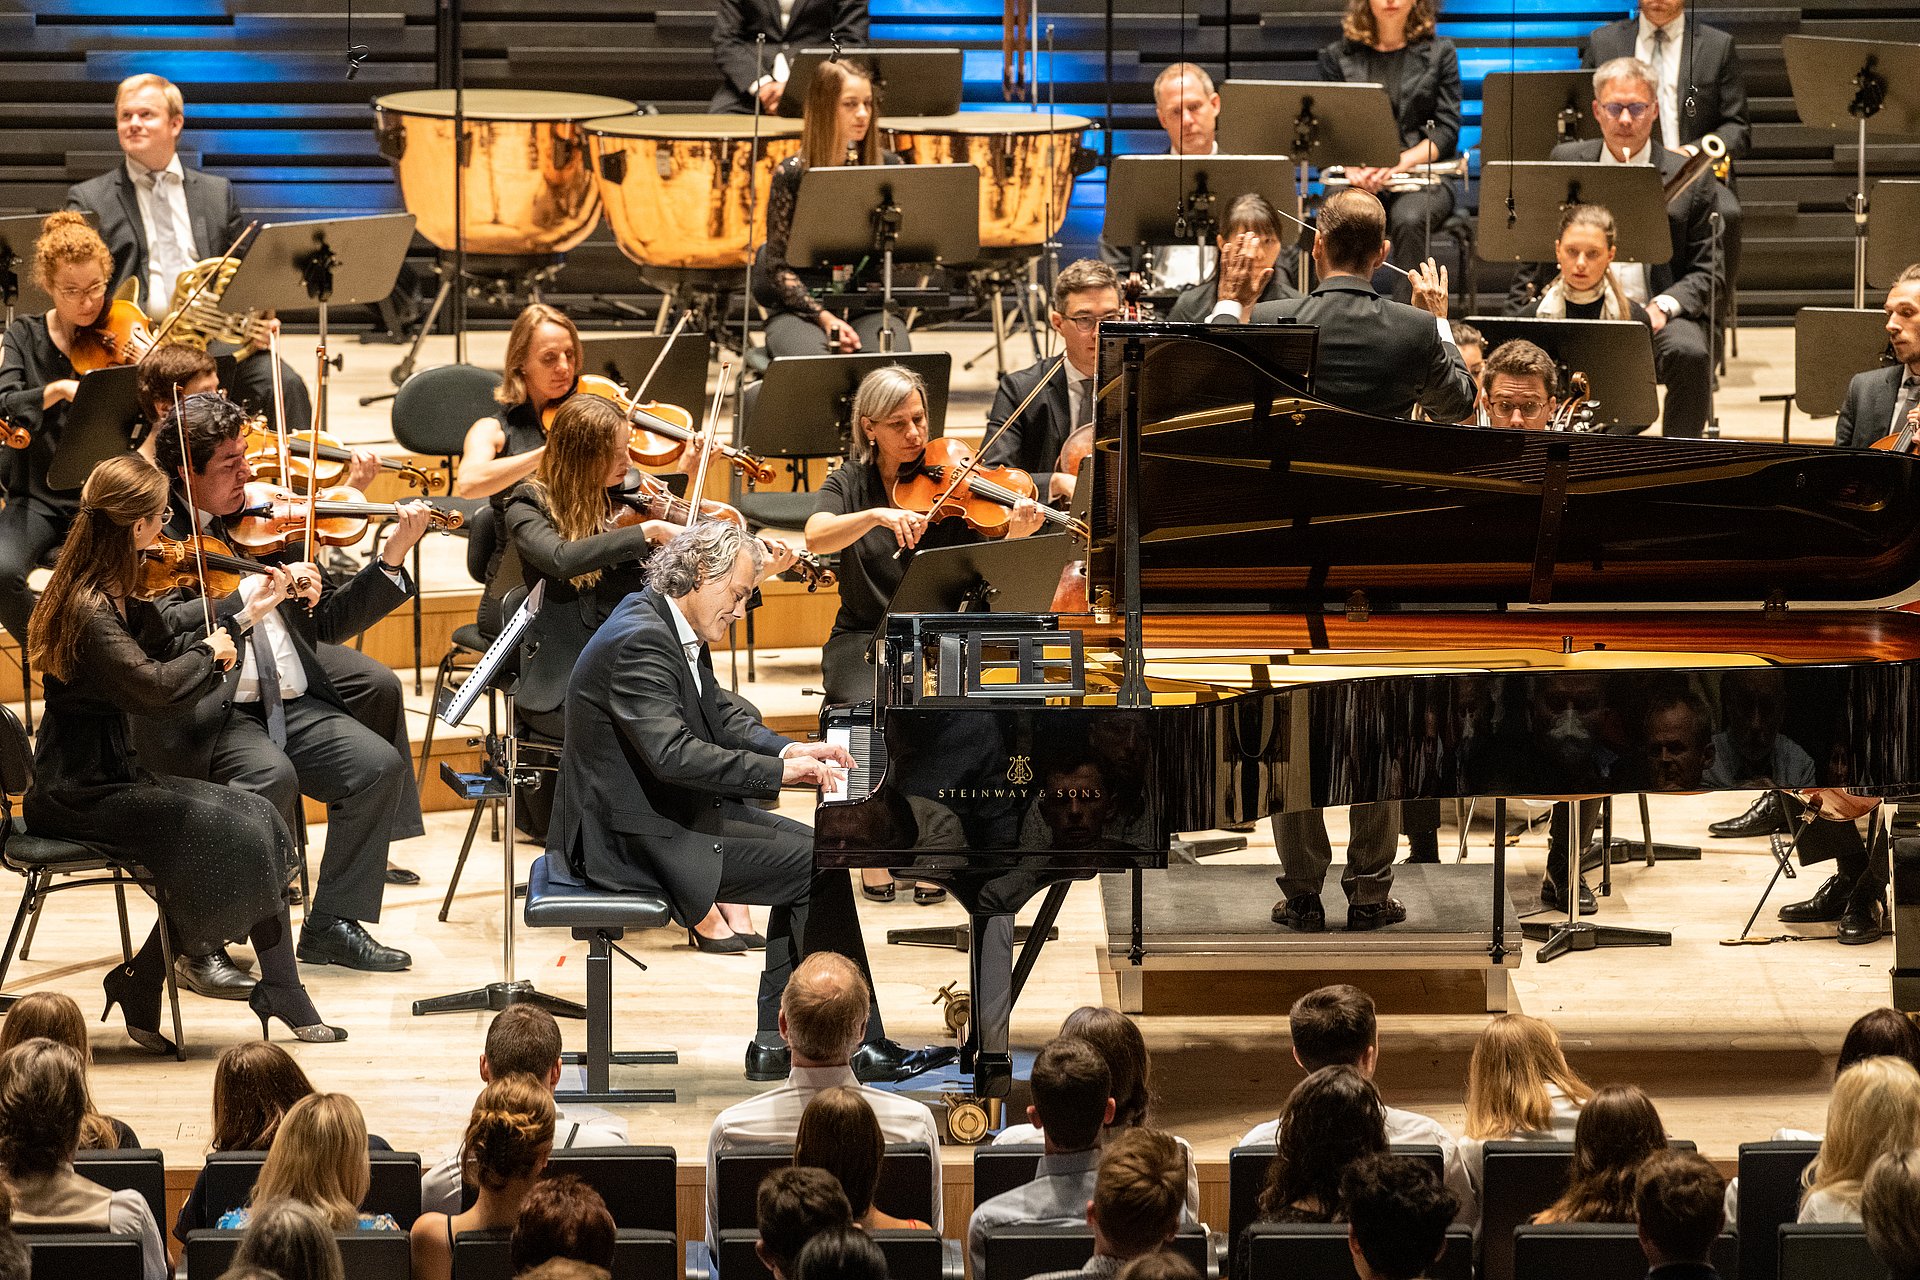 The Symphonische Ensemble München played pieces by Beethoven at the TUM Summer Concerts.